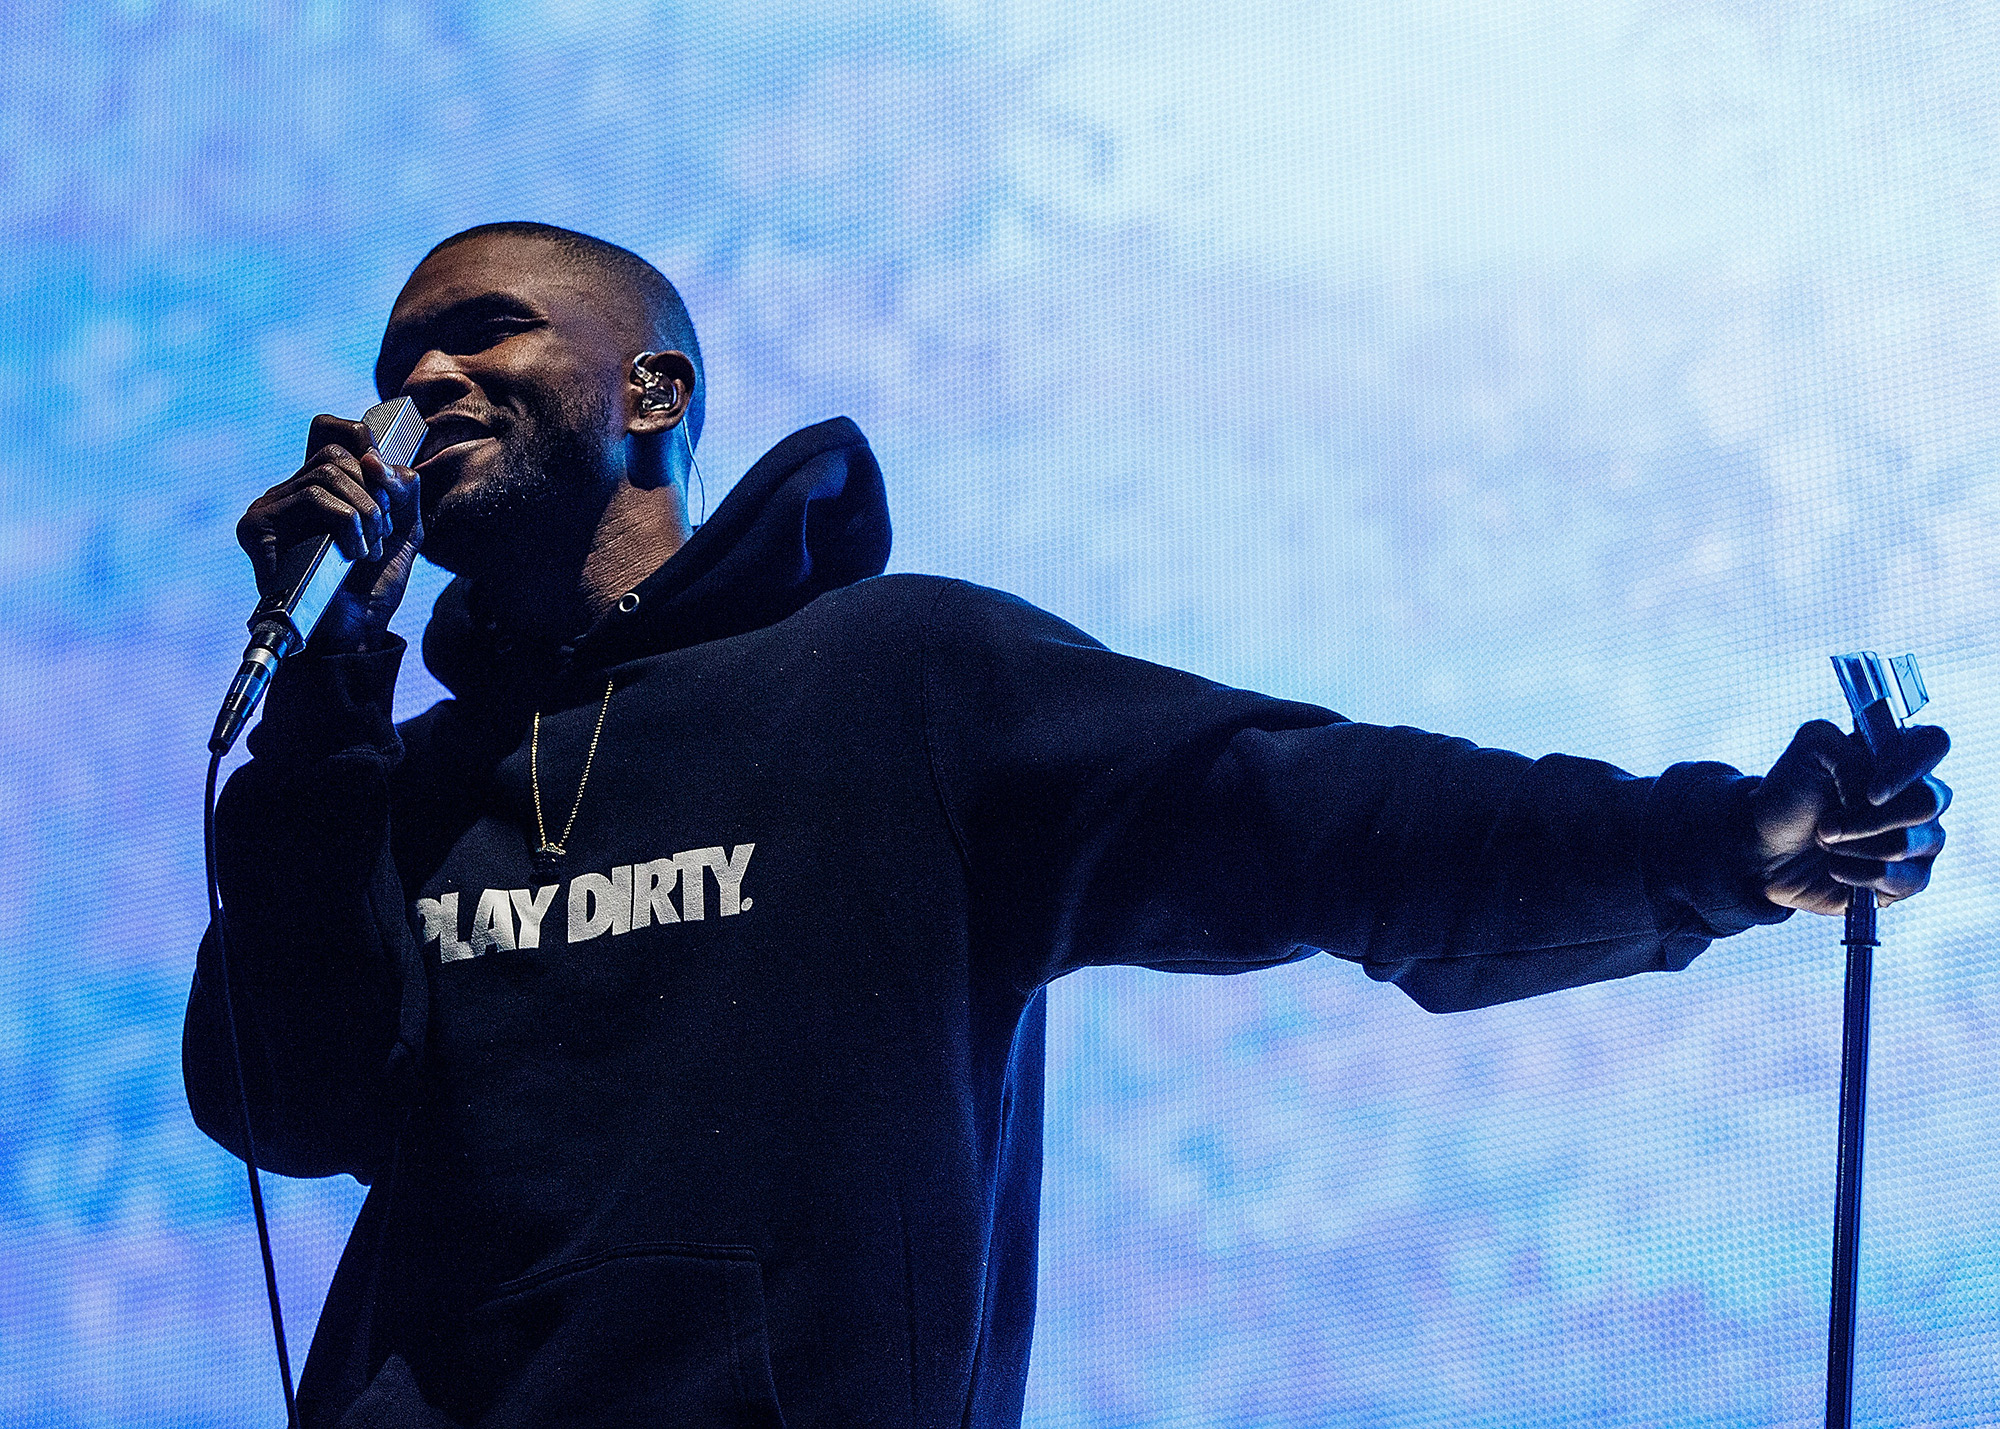 Frank Ocean performs on stage during Day 3 of Pemberton Music and Arts Festival on July 20, 2014 in Pemberton, Canada.  (Photo by Andrew Chin/FilmMagic) (Andrew Chin—FilmMagic)